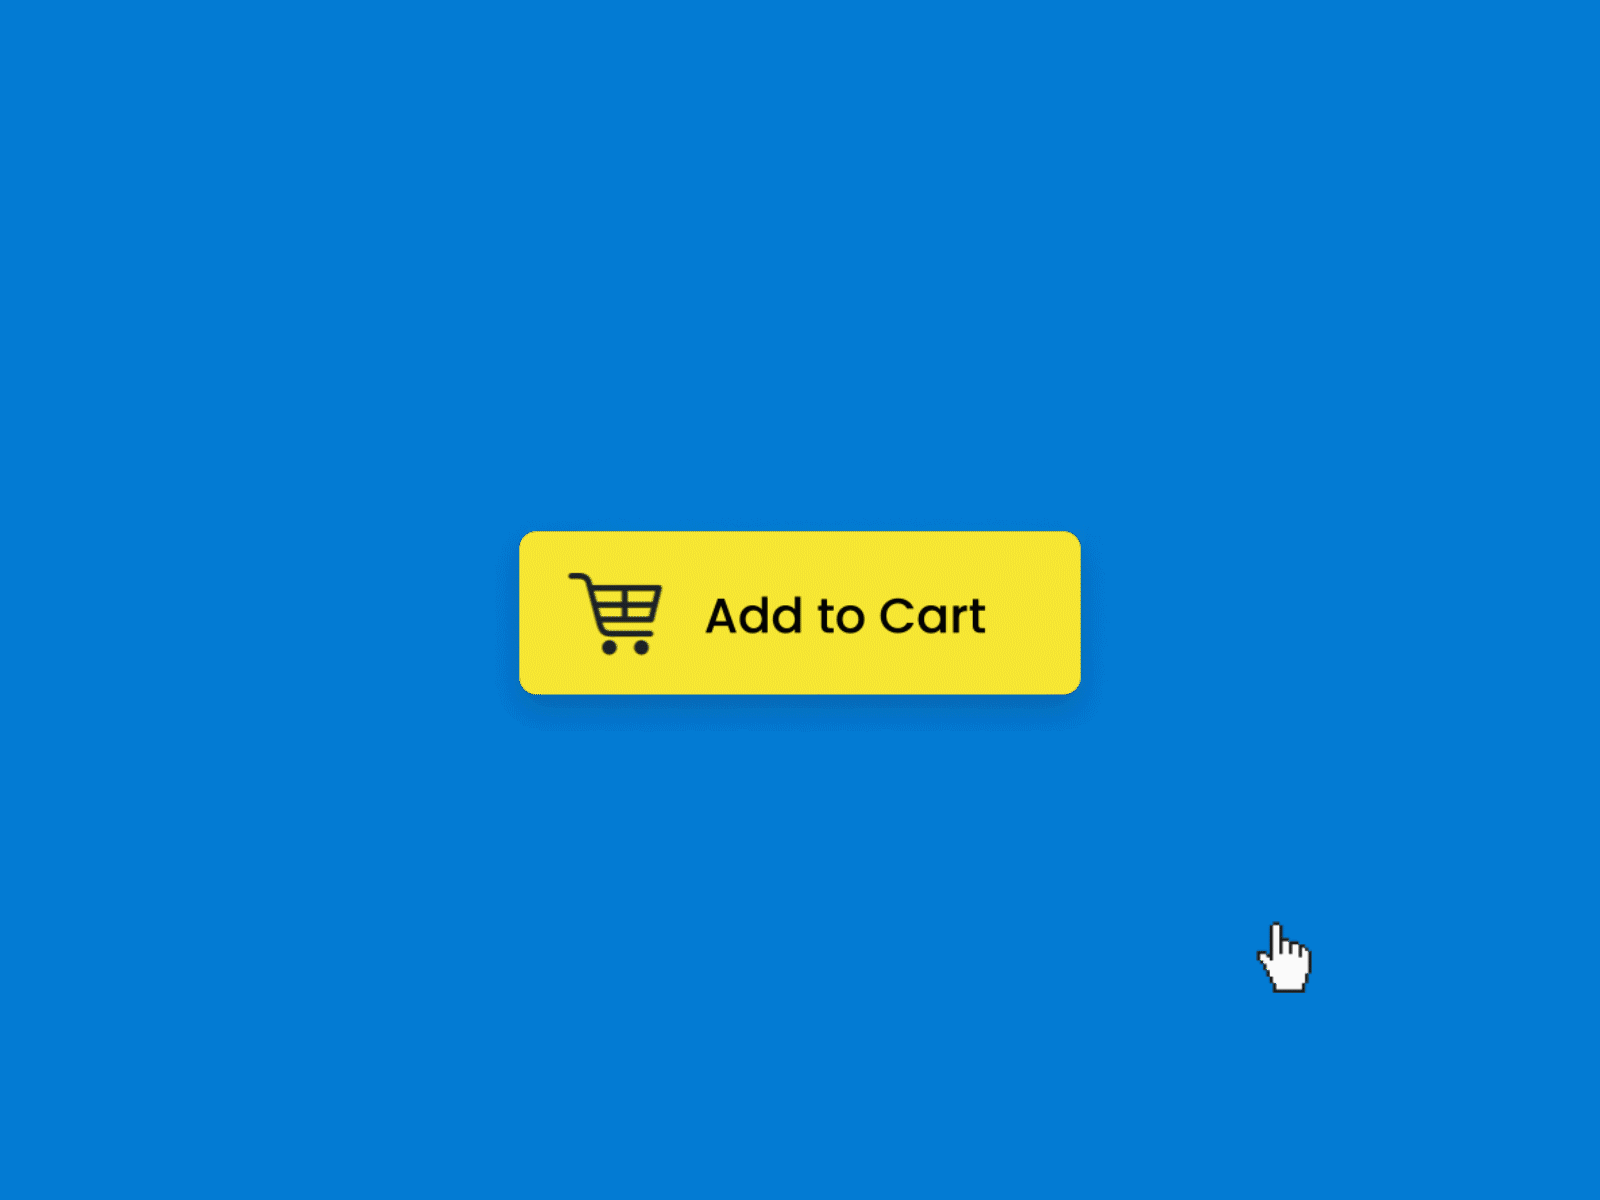 Add to Cart Micro-interaction